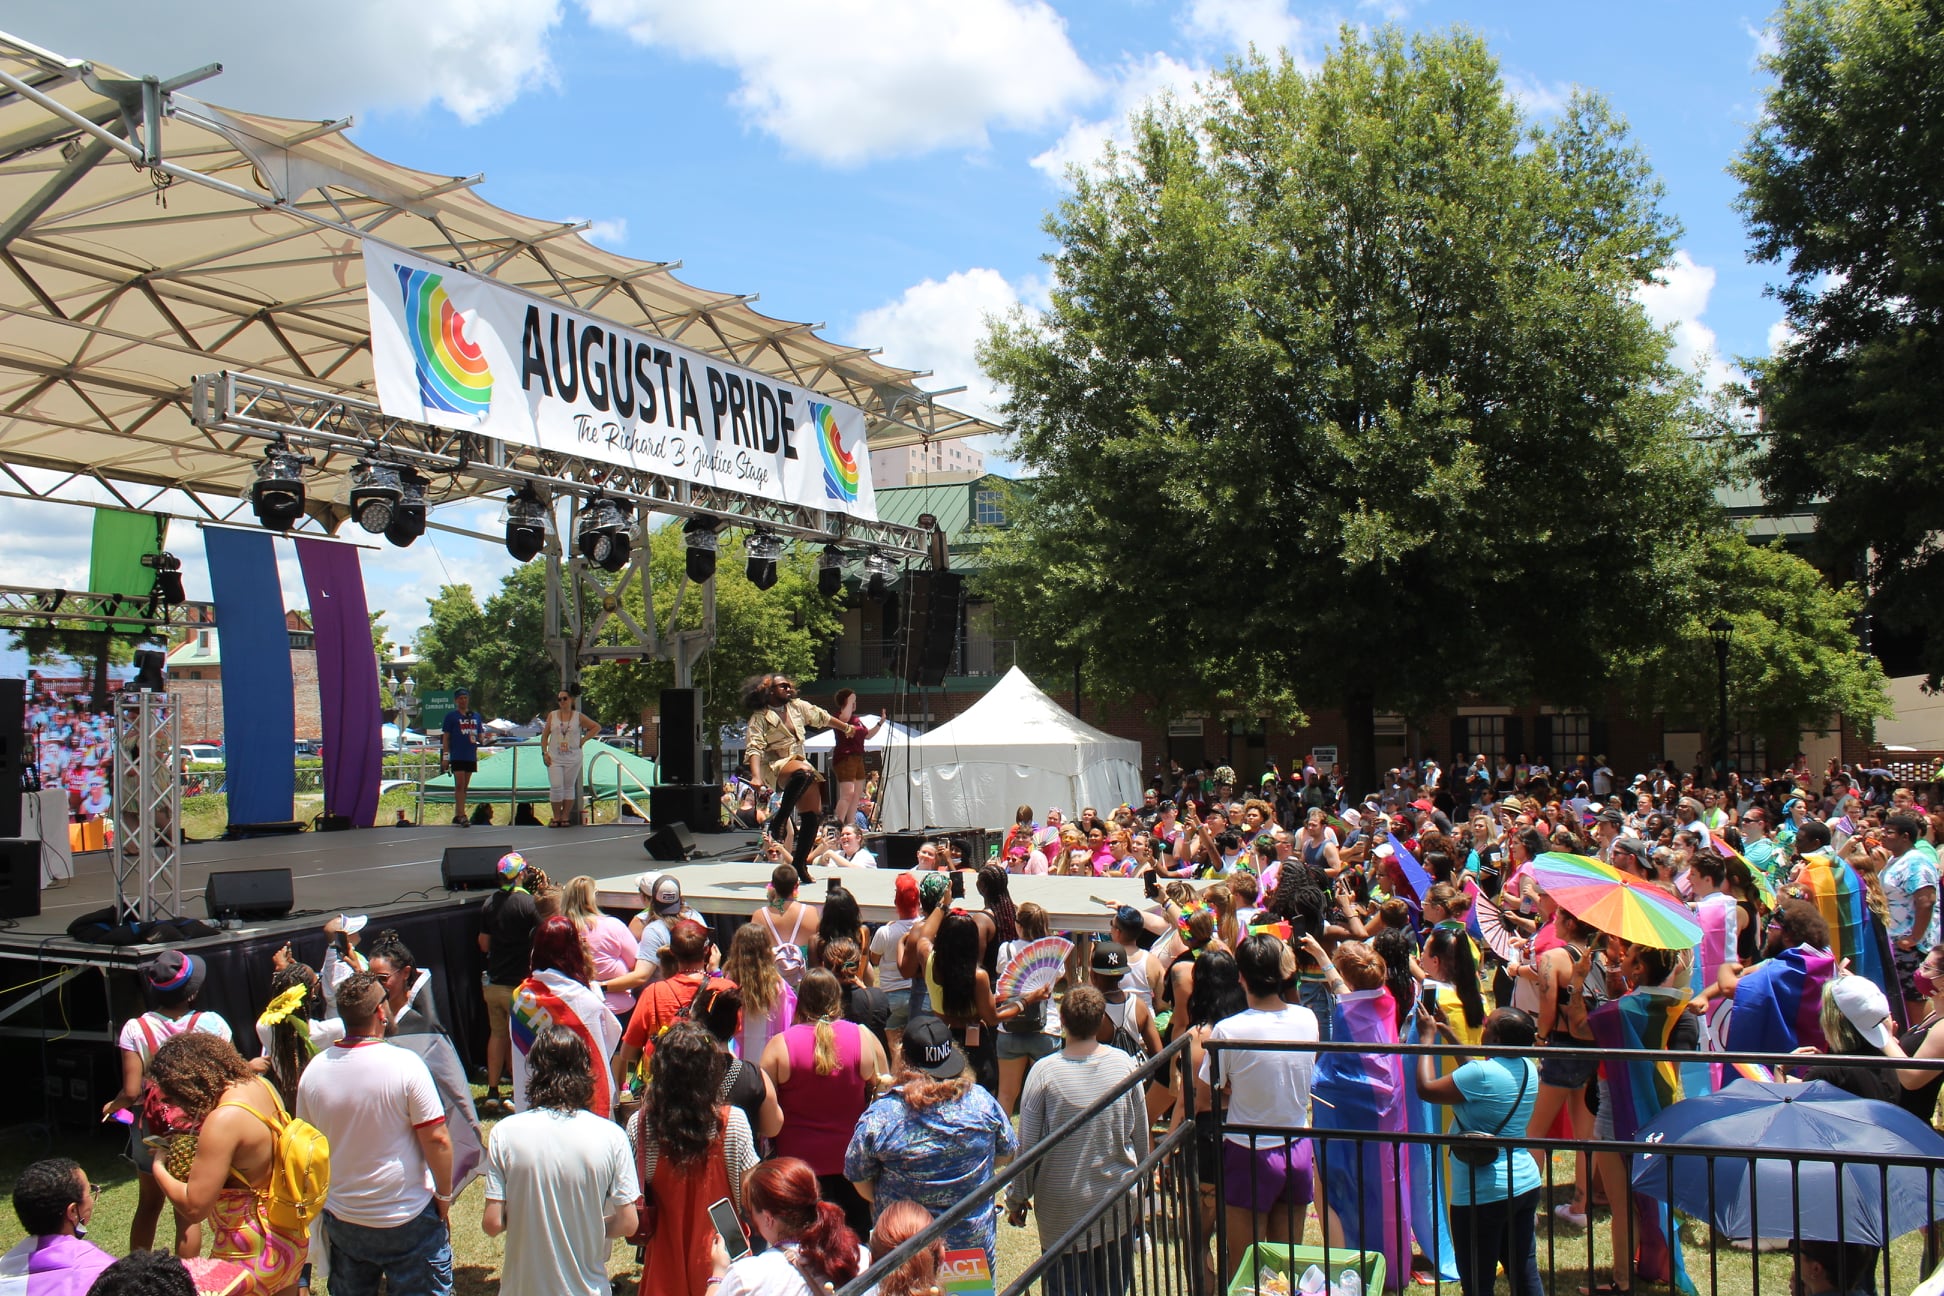 Background image of Augusta Pride stage surrounded by attendees